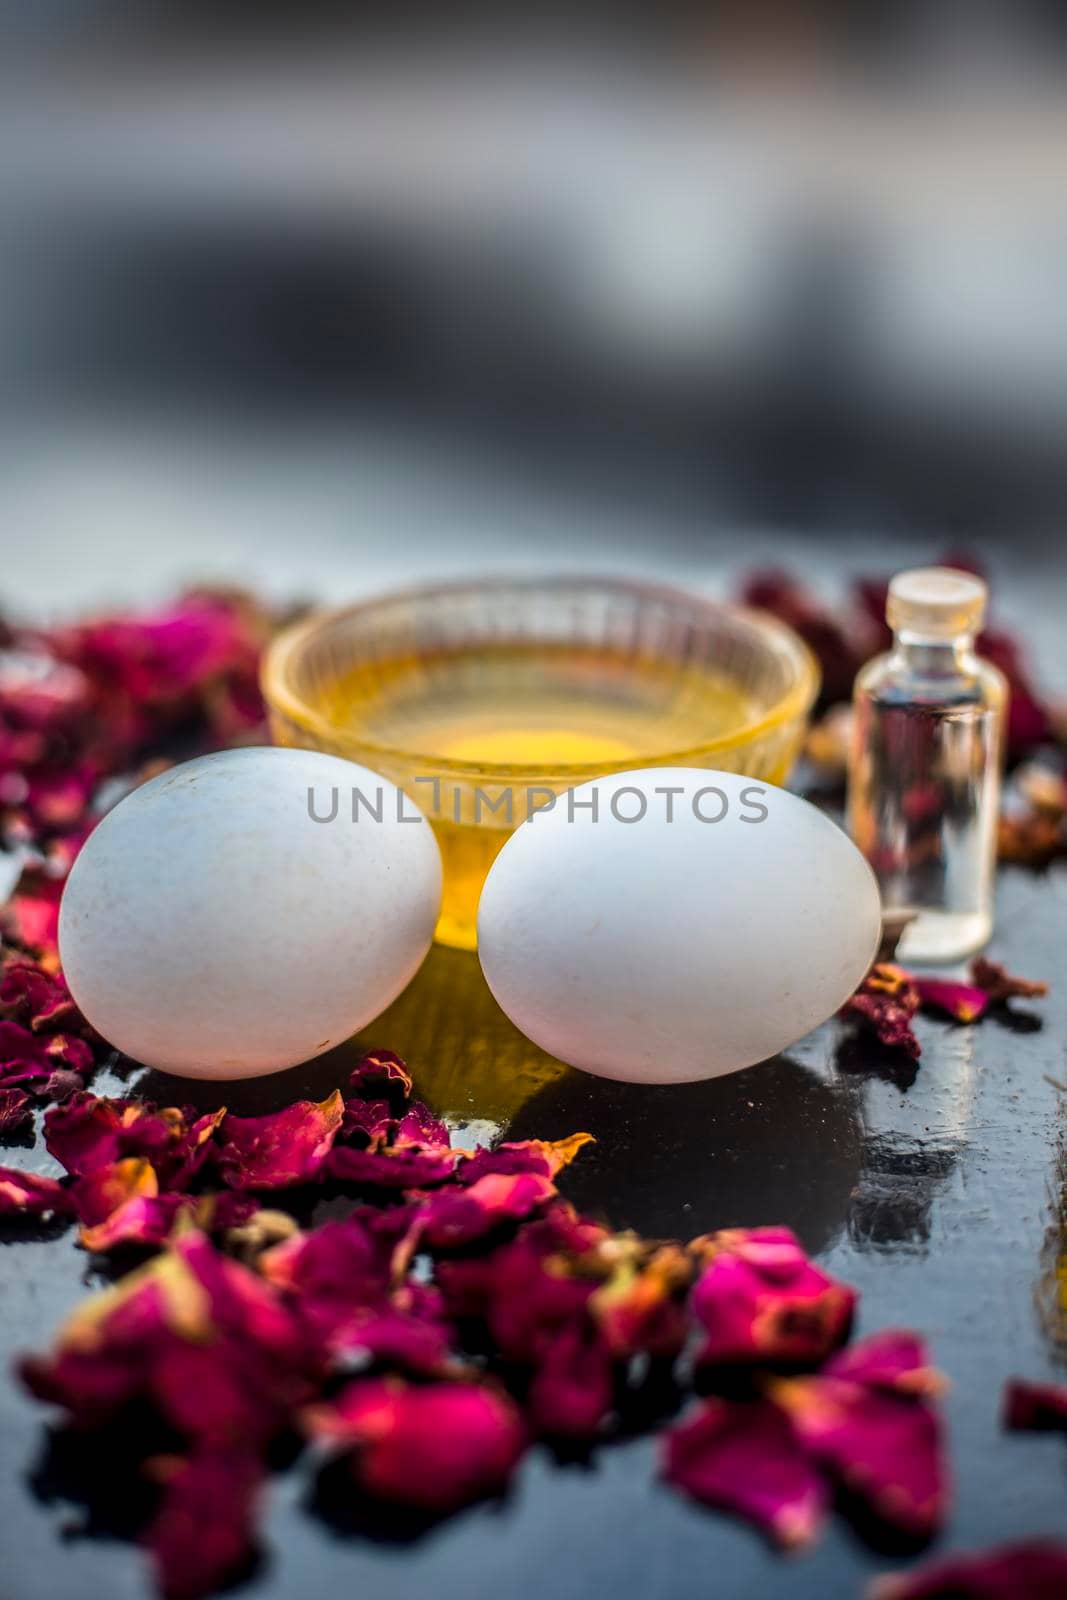 Trio pack of herbs and ingredients to fight dandruff on the wooden surface well mixed in a glass bowl which are castor oil, coconut oil, and egg. Also used to treat itchiness and to deep condition. by mirzamlk